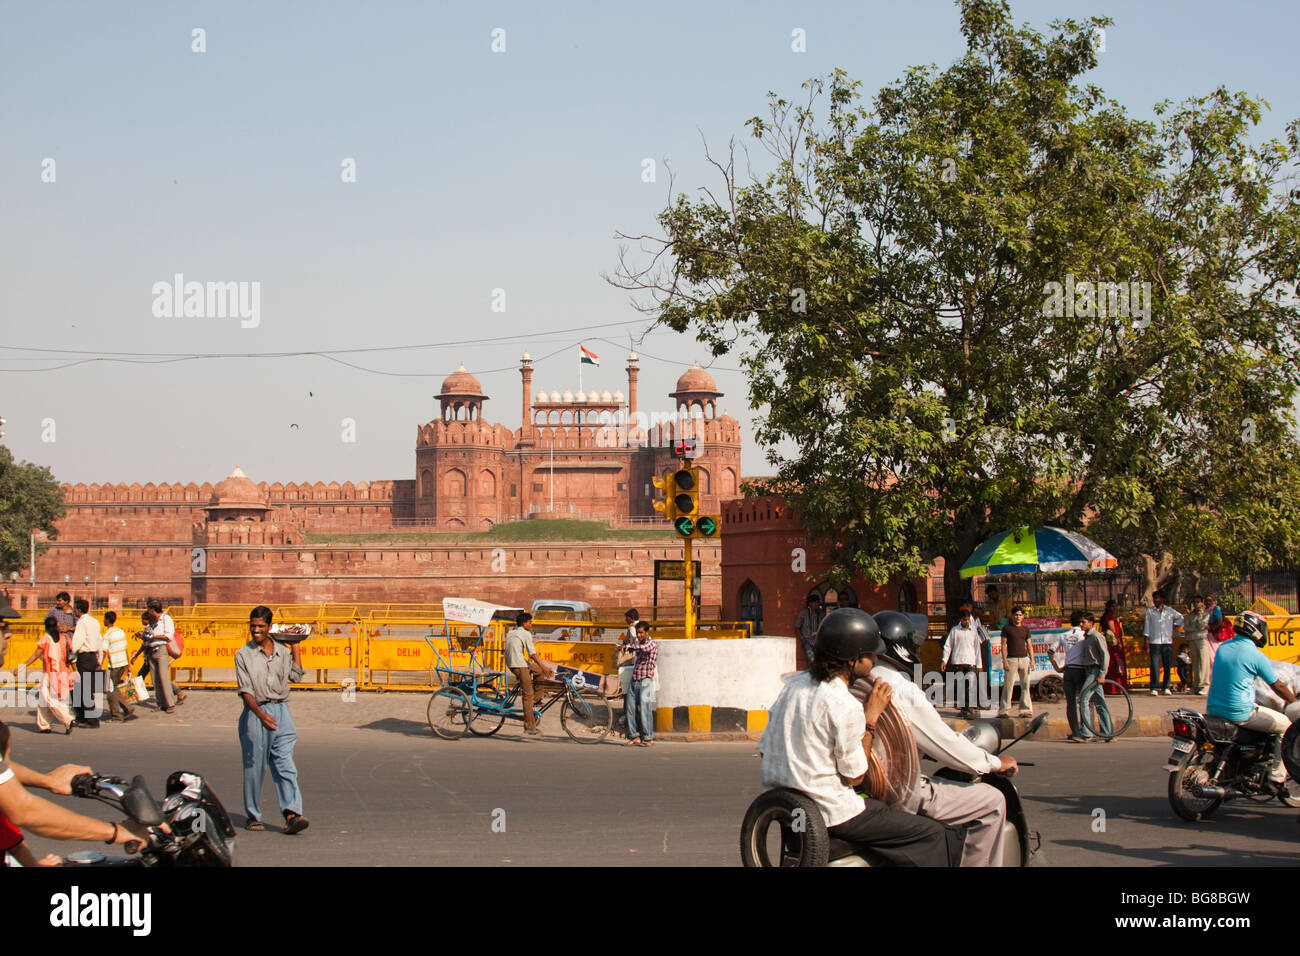 The Red Fort, Delhi Stock Photo